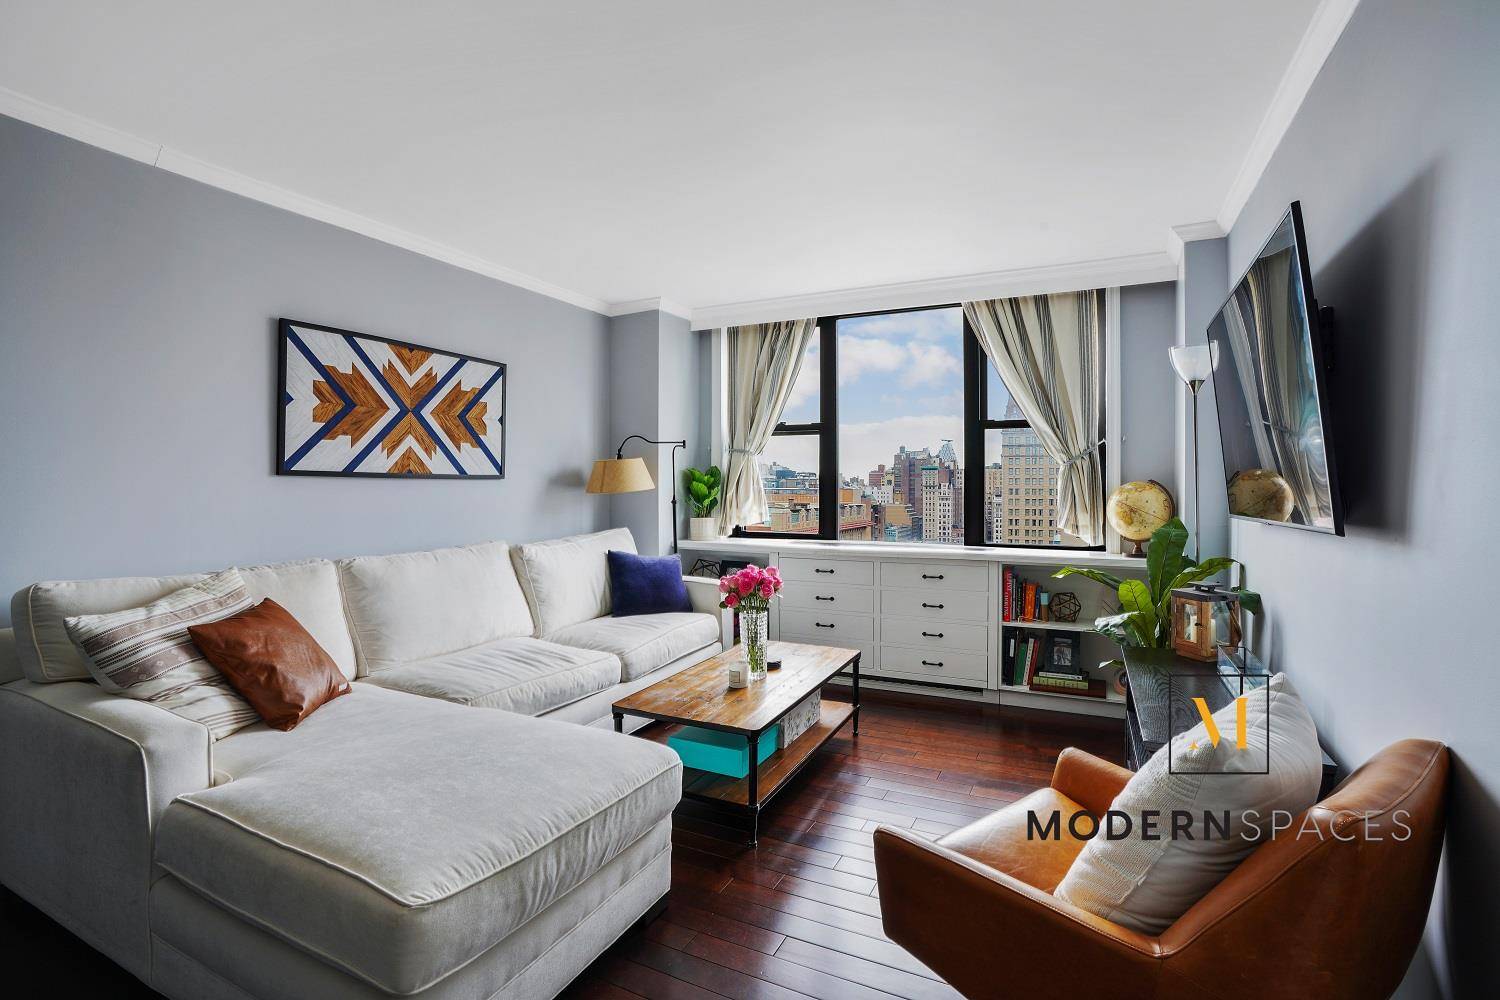 Renovated 1 Bedroom with Empire State Building and Open Skyline ViewsResidence 20F is a bright home with western exposure designed with great attention to details.